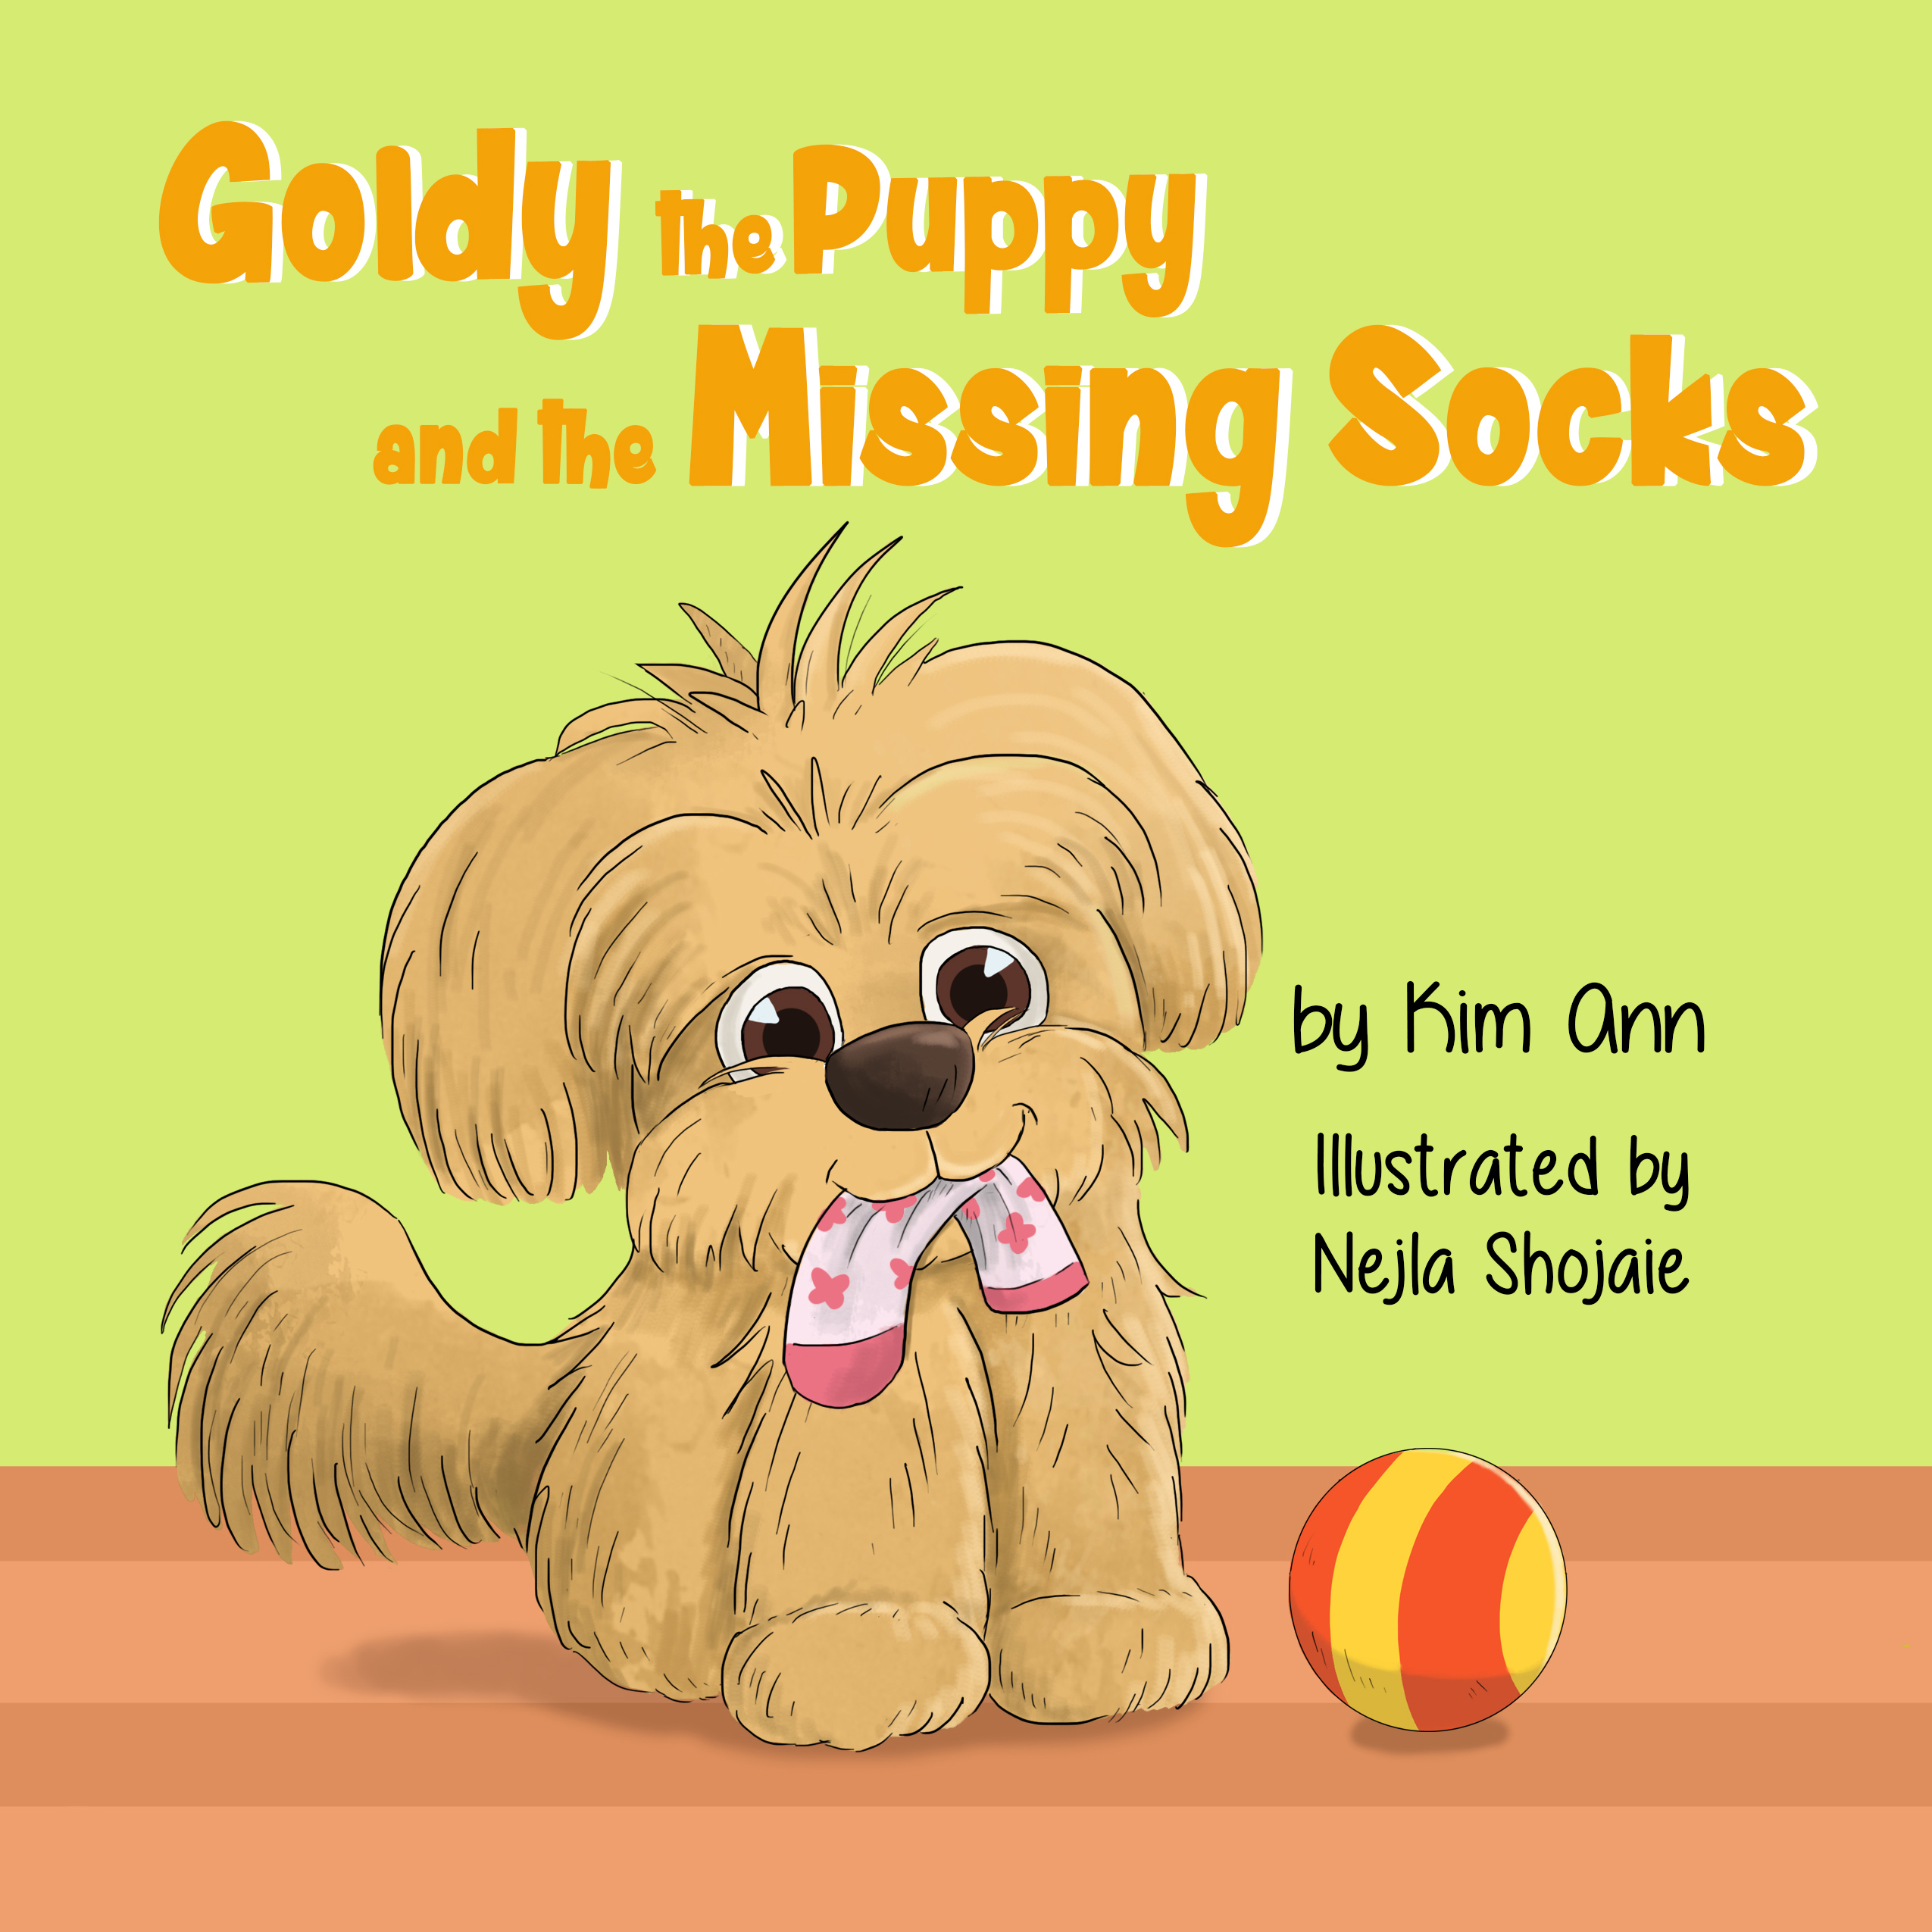 FREE: Goldy the Puppy and the Missing Socks by Kim Ann